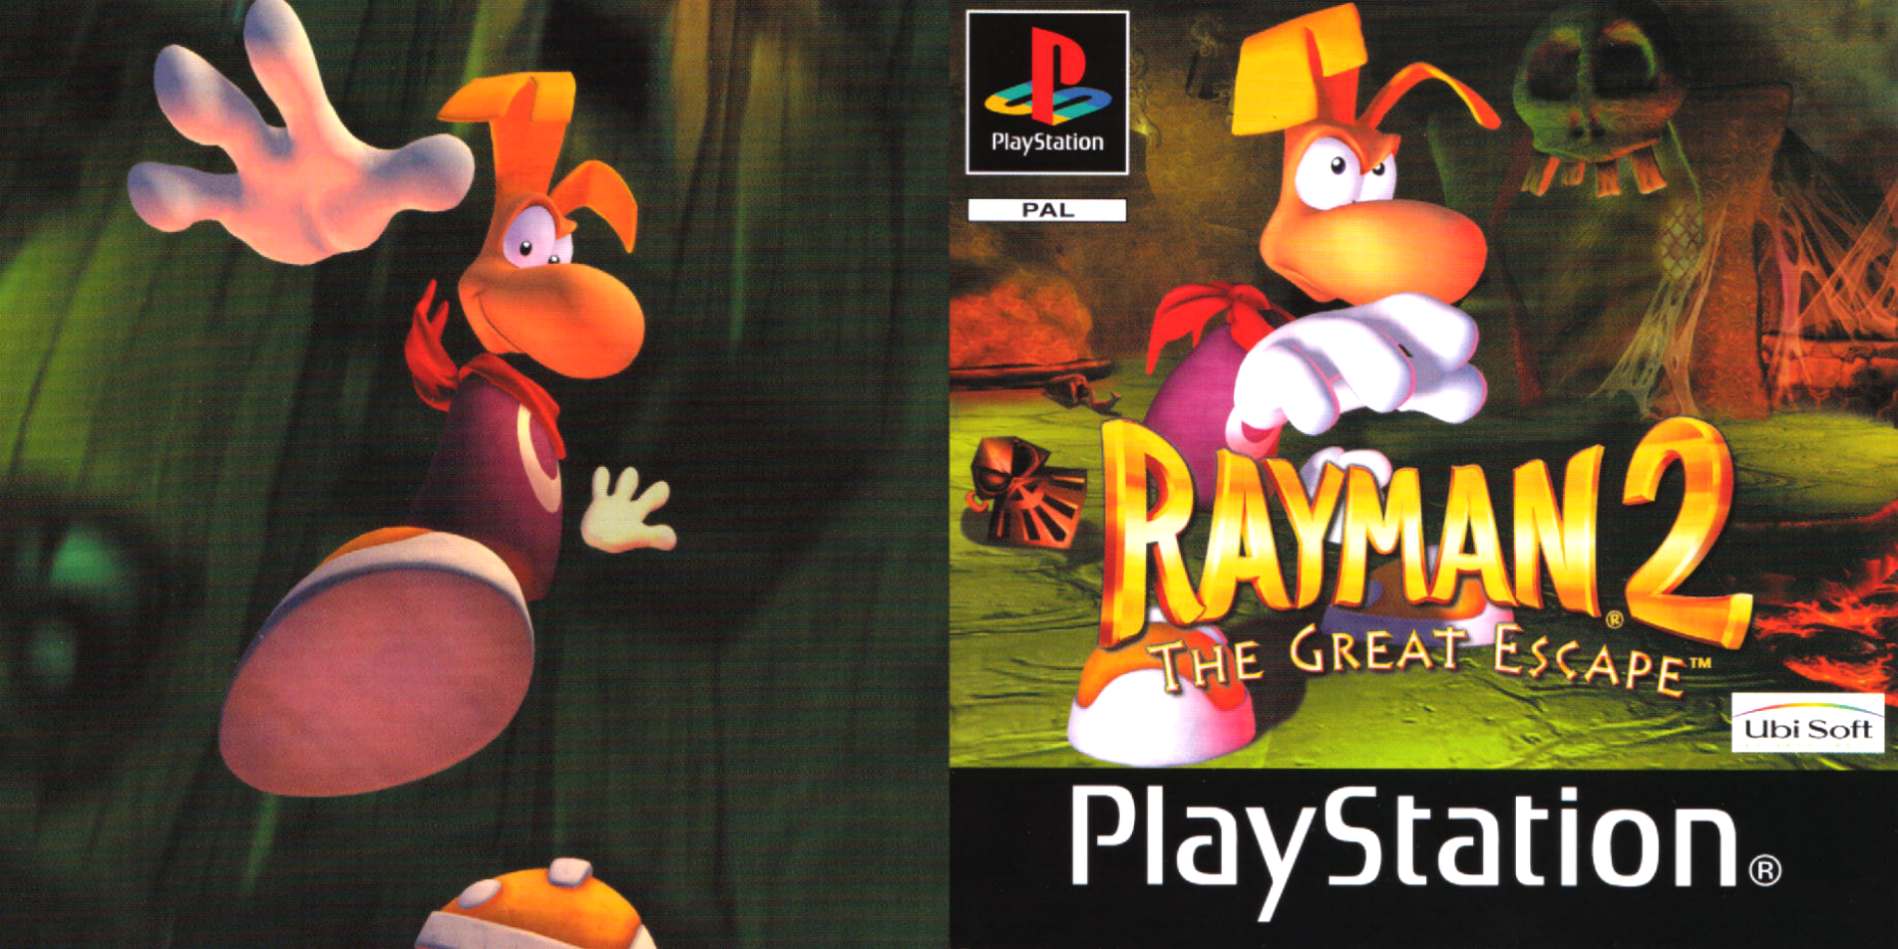 Rayman ROM (ISO) Download for Sony Playstation / PSX 